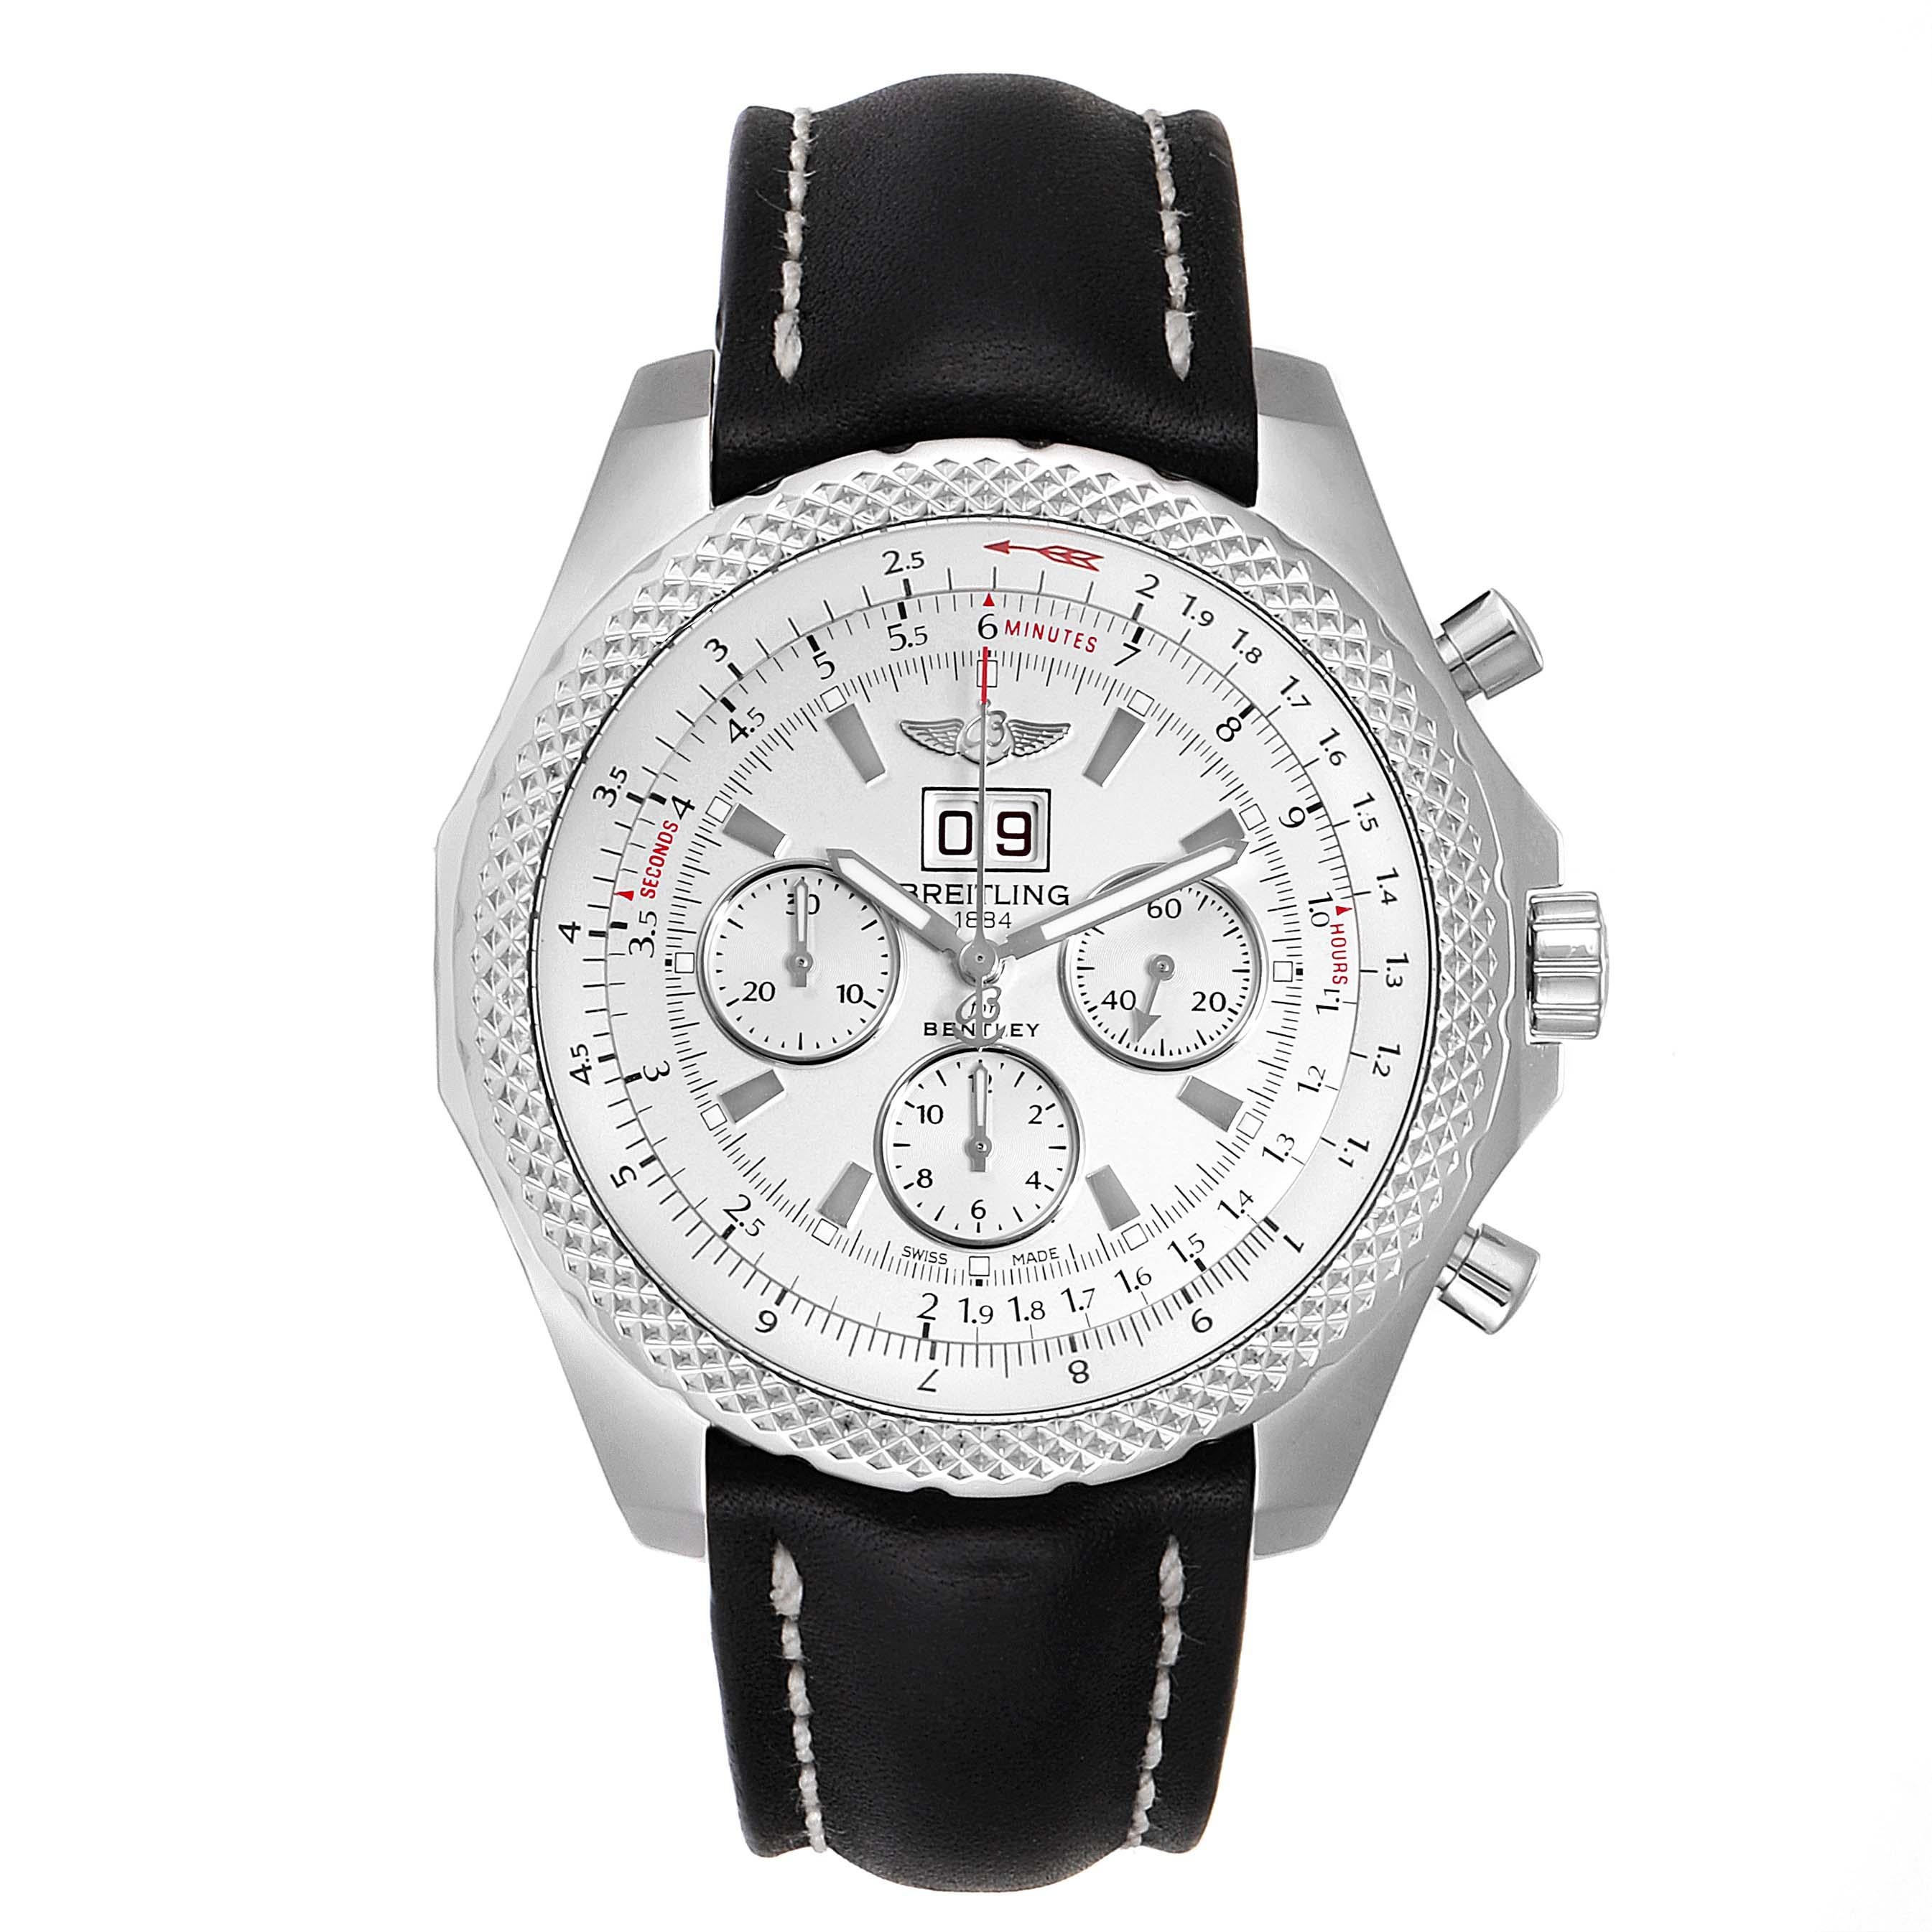 Breitling Bentley 6.75 Speed Chronograph Silver Dial Mens Watch A44364. Automatic self-winding officially certified chronometer movement. Chronograph function. Stainless steel case 48.7 mm in diameter. Case thickness: 16.5 mm. Stainless steel